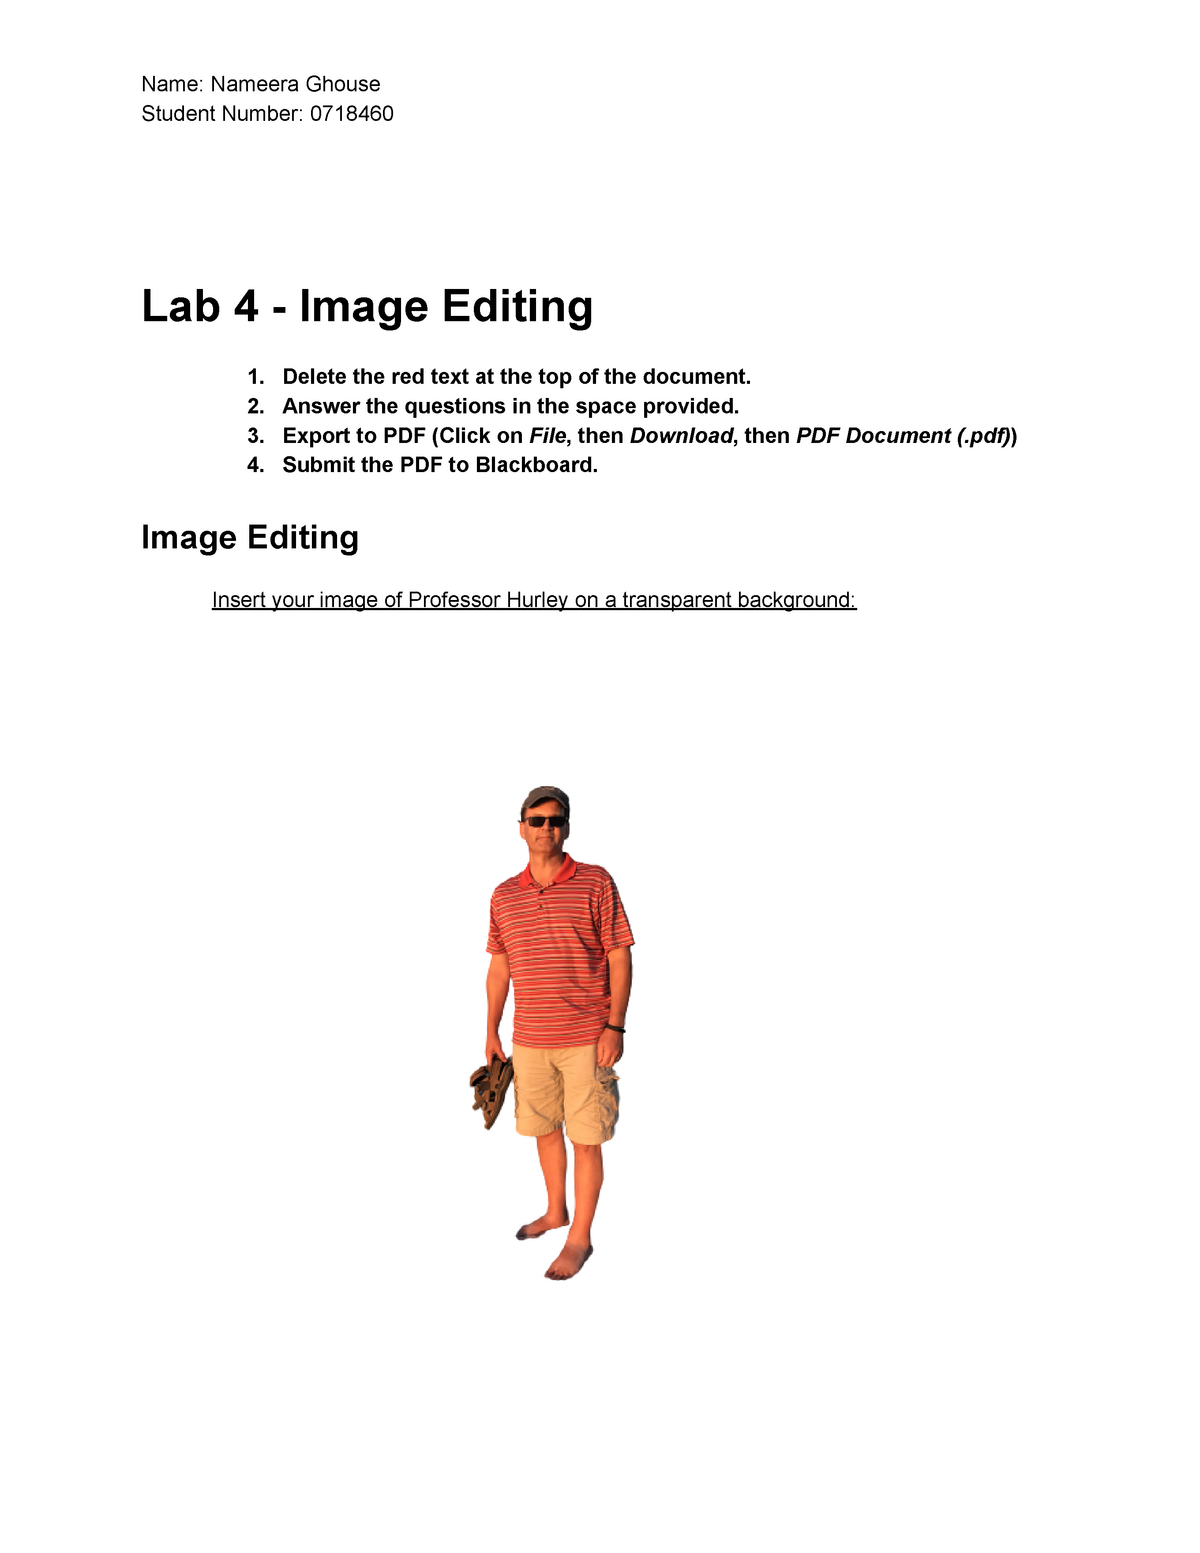 Copy of Lab 4 - Image Editing - Name: Nameera Ghouse Student 